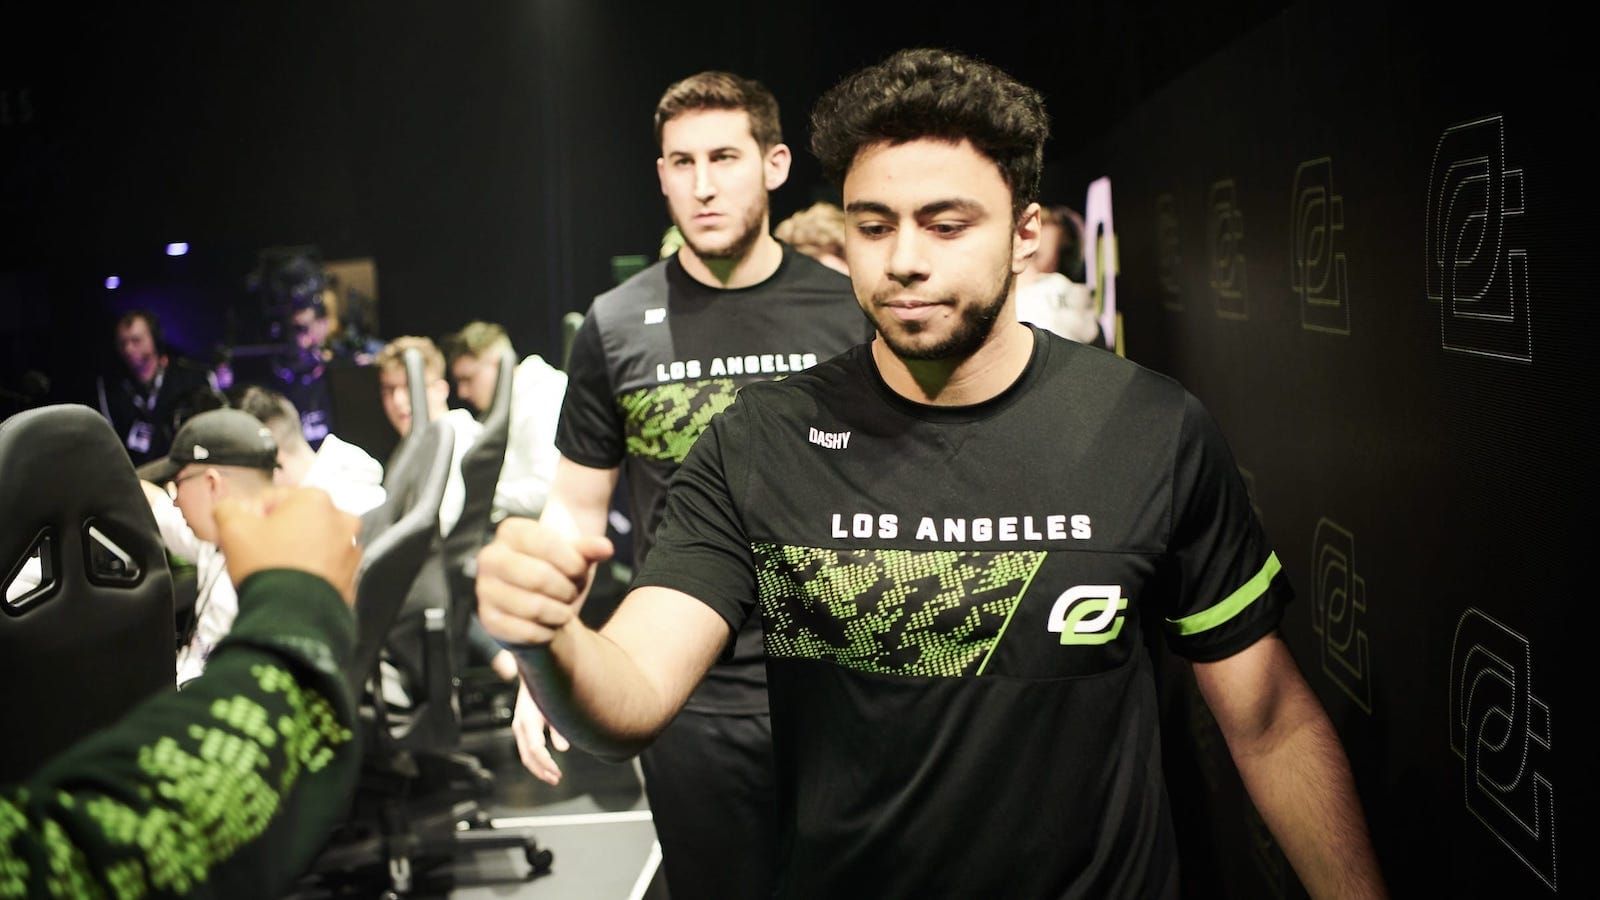 From OpTic Gaming to OpTic Texas: A brief history of OpTic | Nerd Street